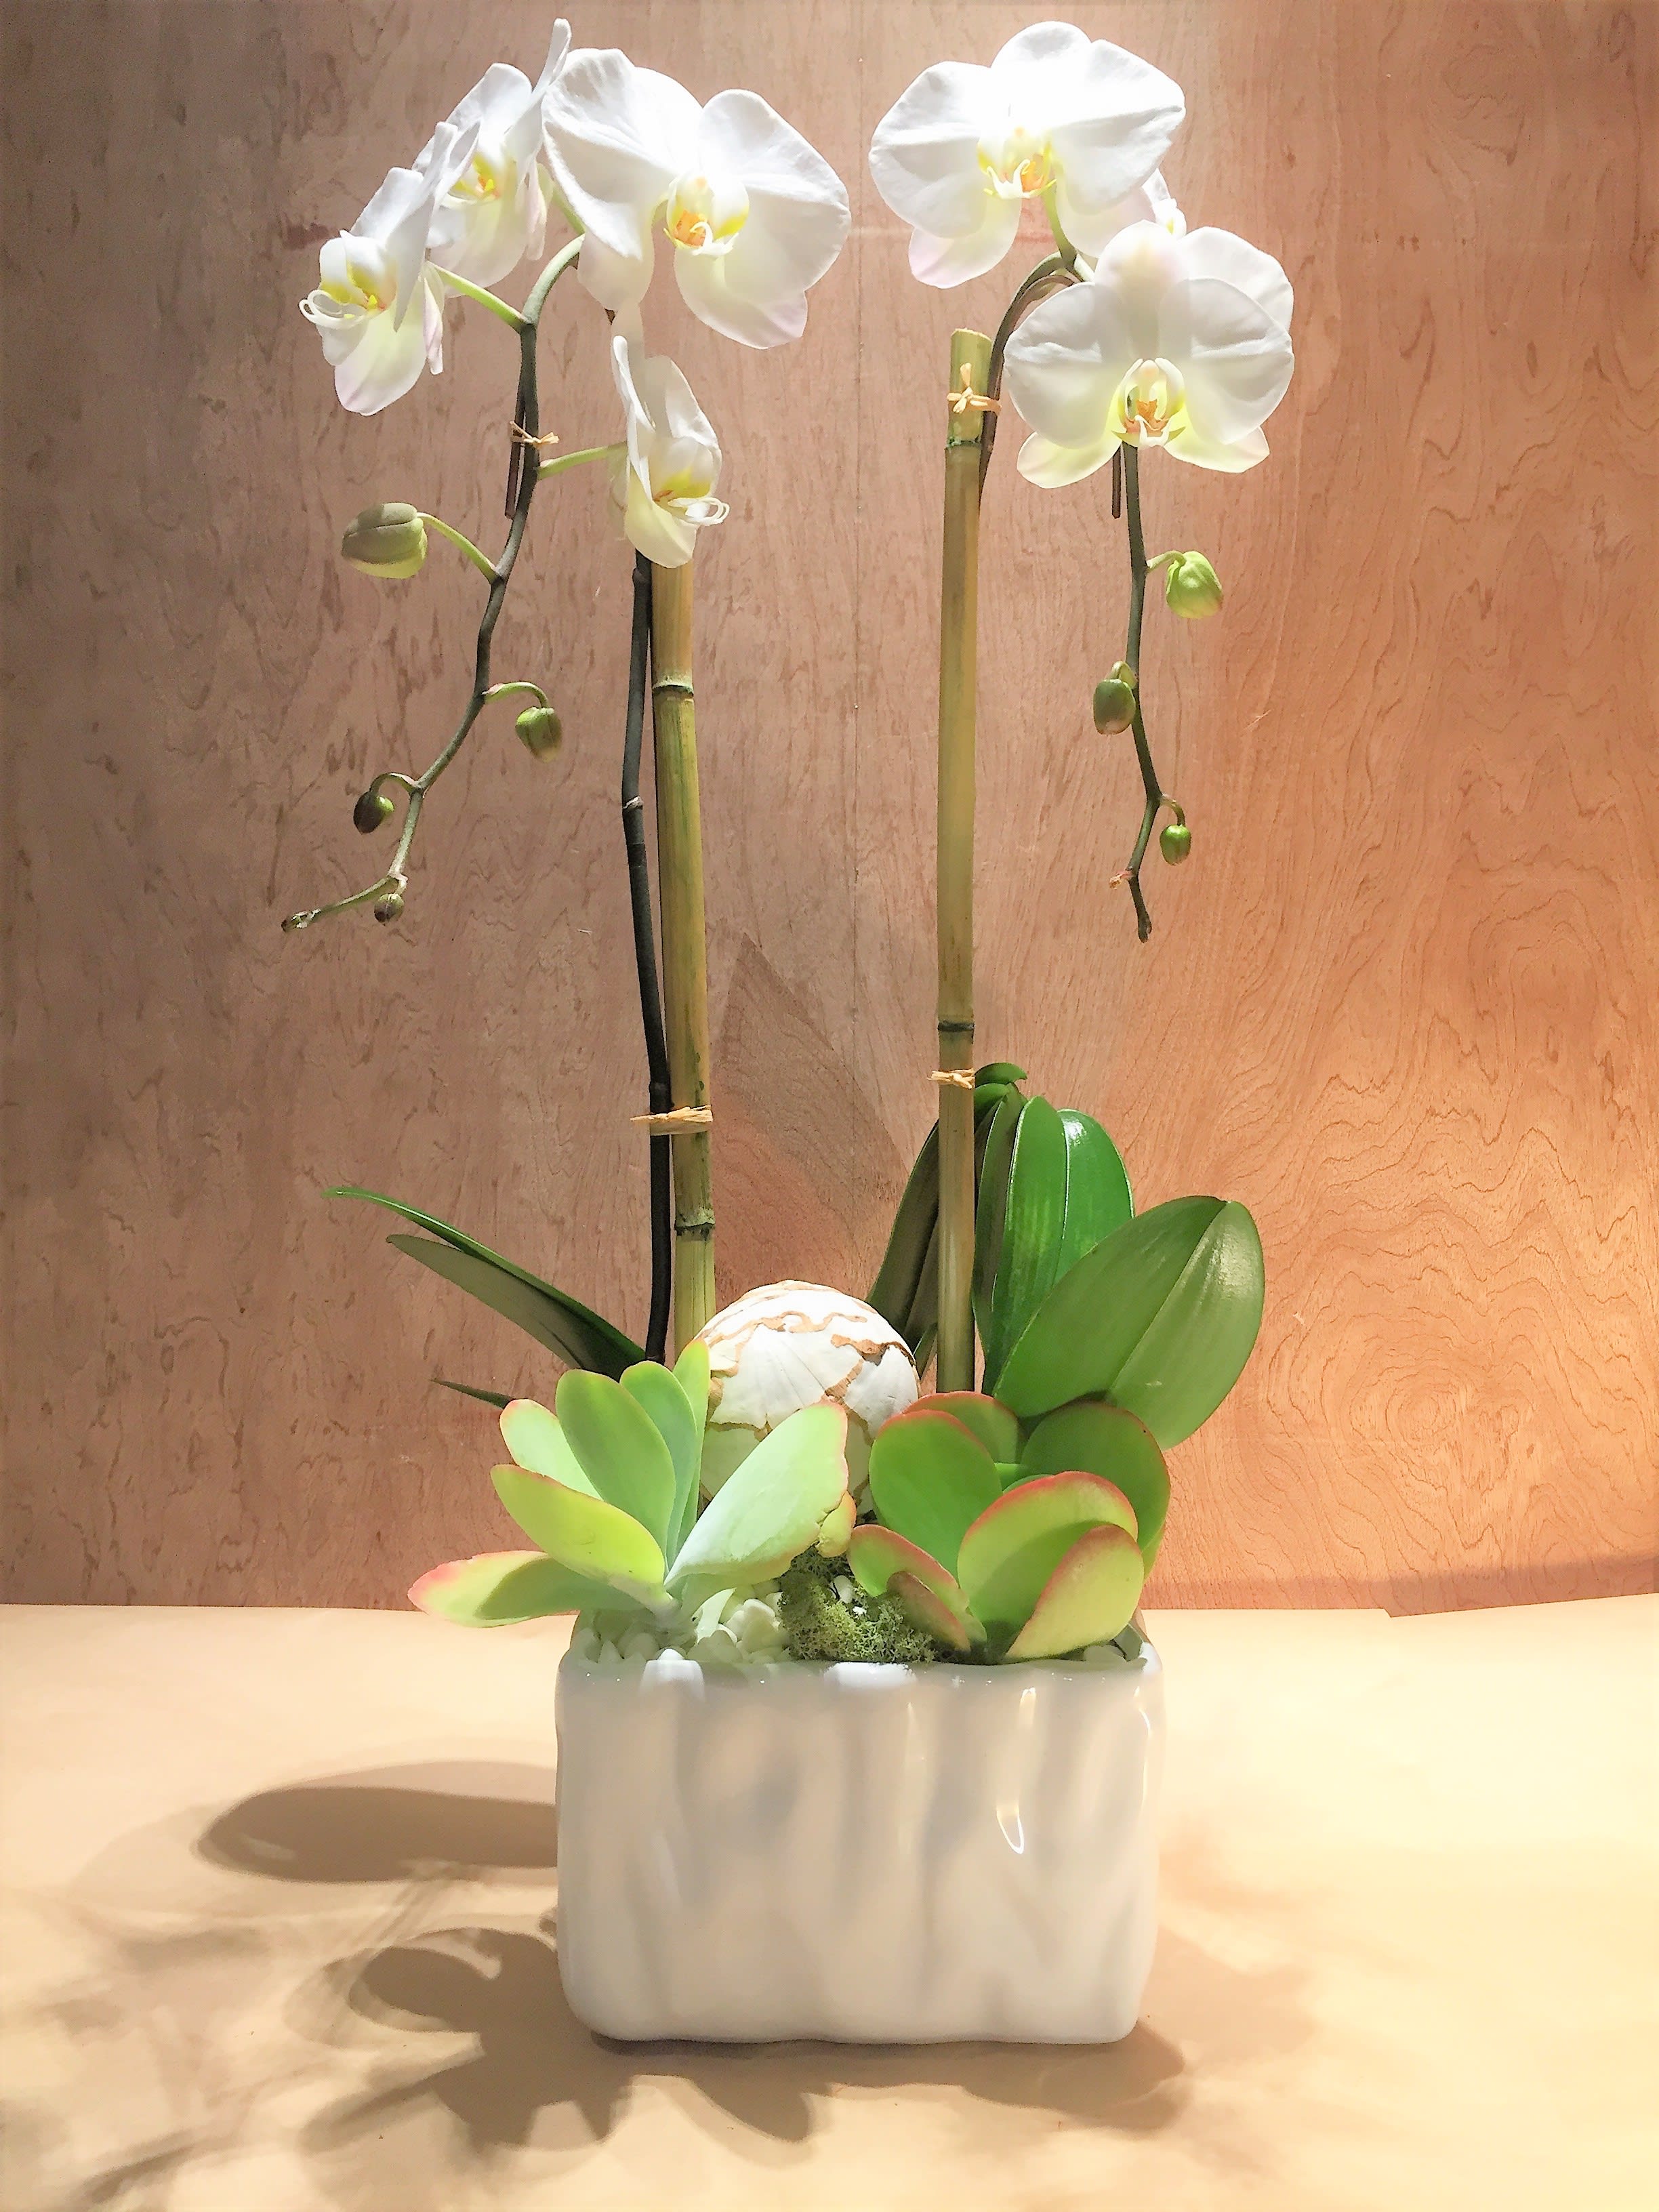 Toluca - Double orchid plant arrangement with succulents and natural bamboo with an authentic style.  